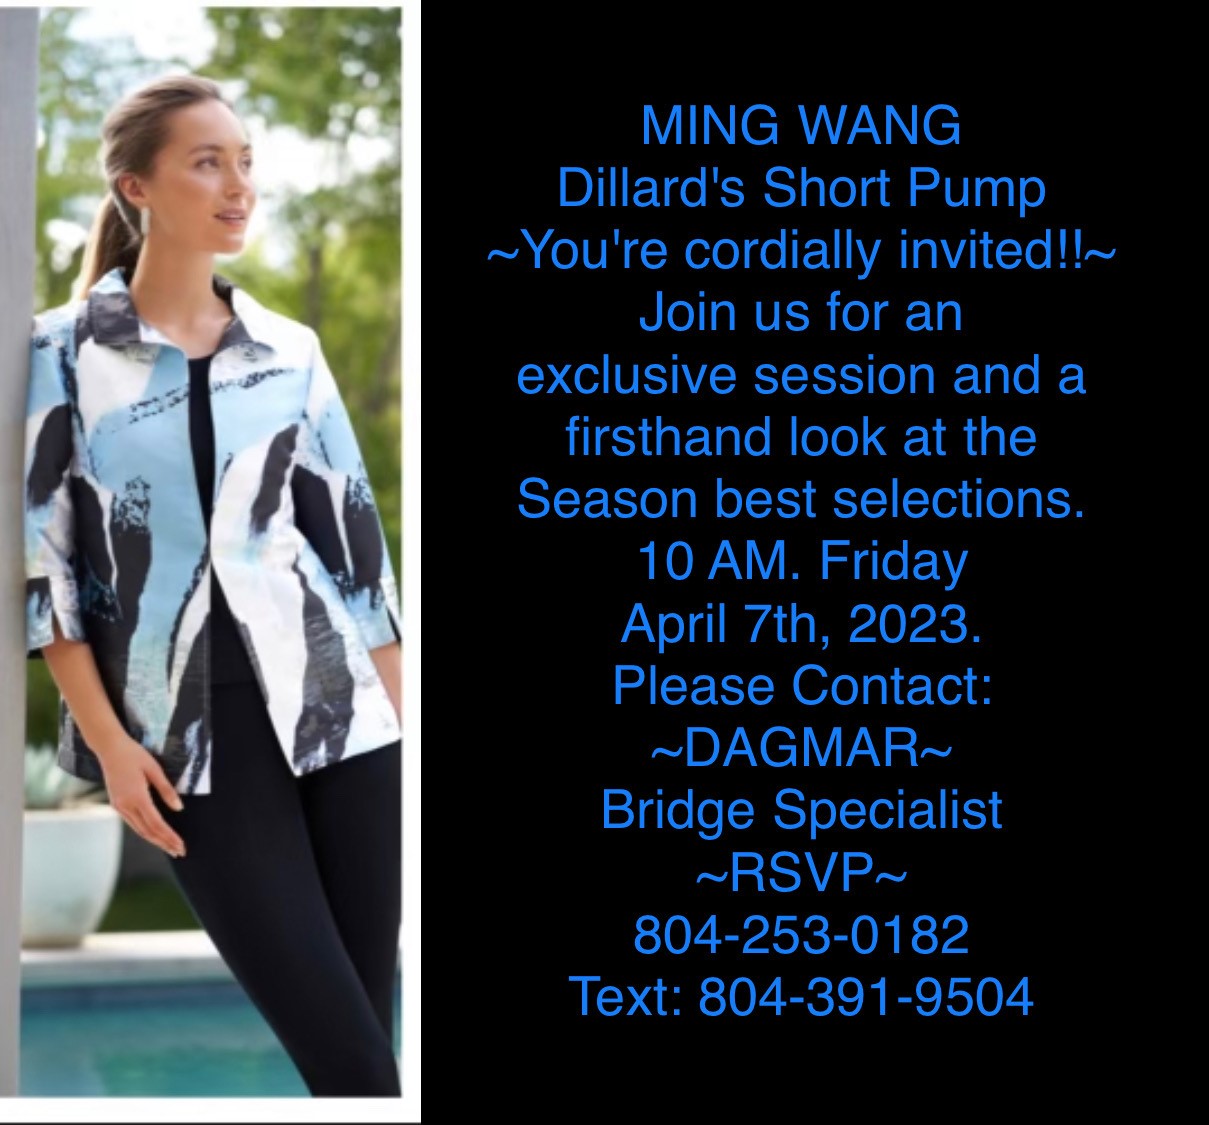 Ming Wang Cordially Invites You!!! from Dillard's